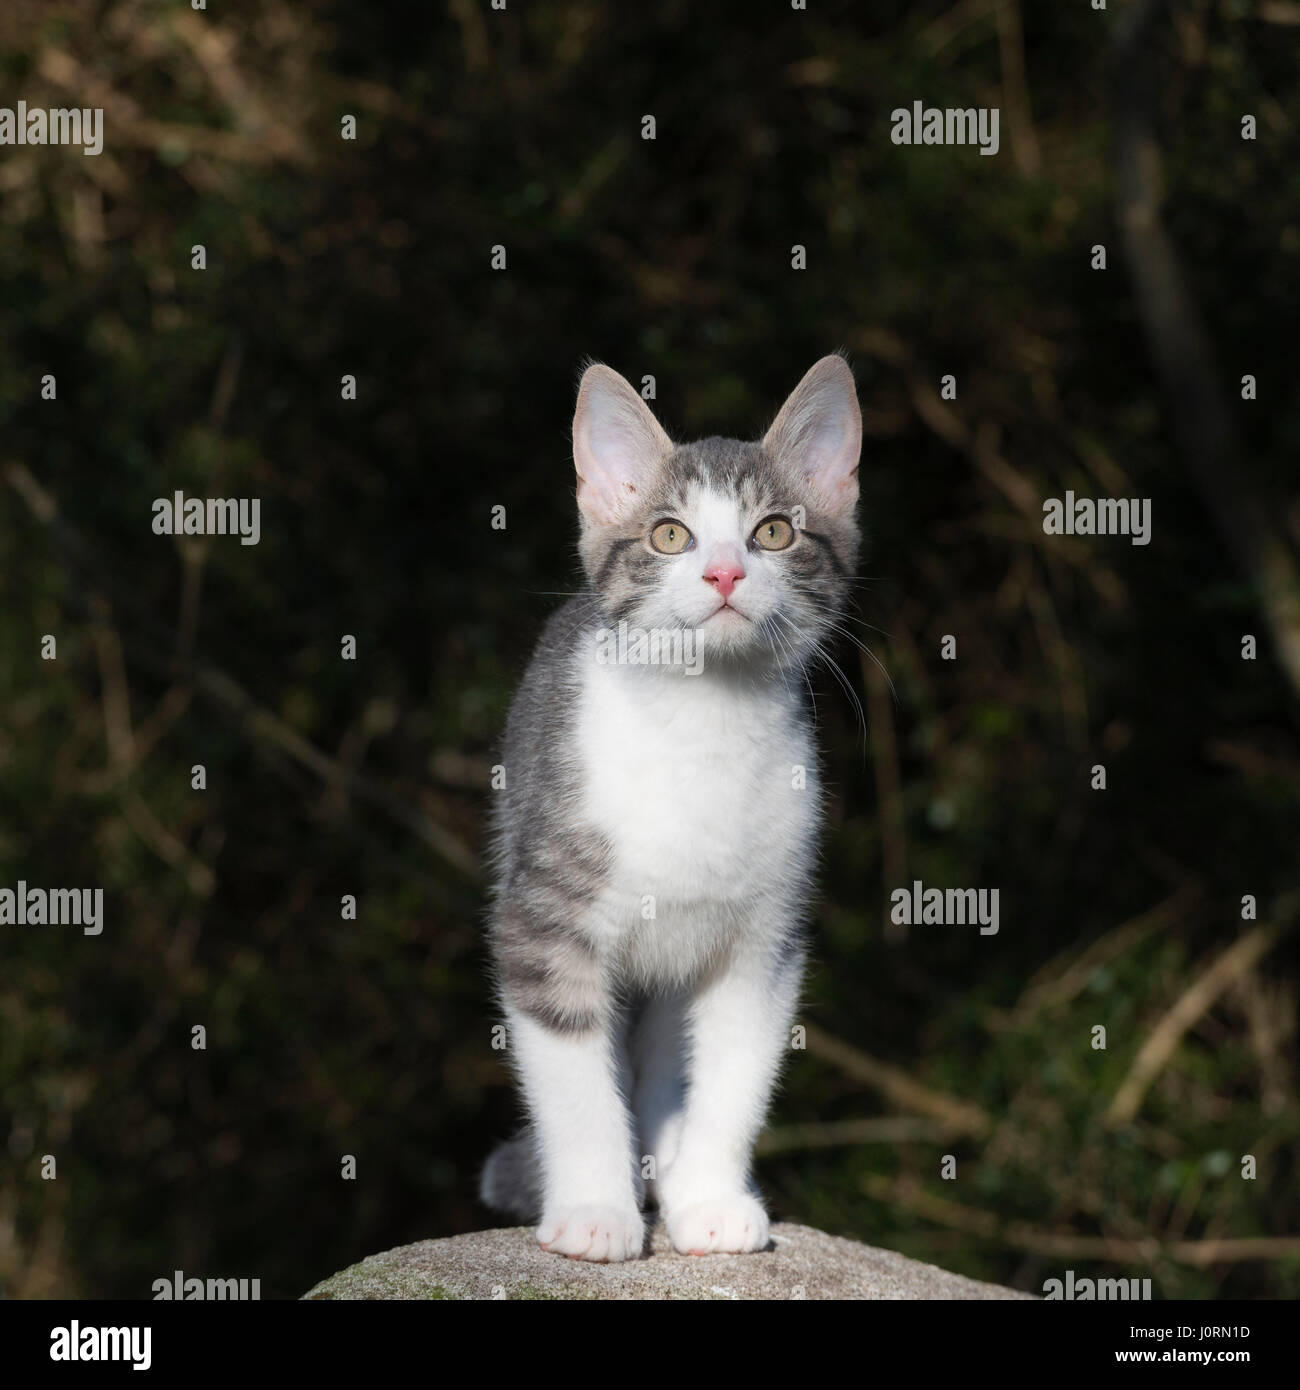 A Grey and White Kitten Standing on a Boulder Looking Upward Stock Photo